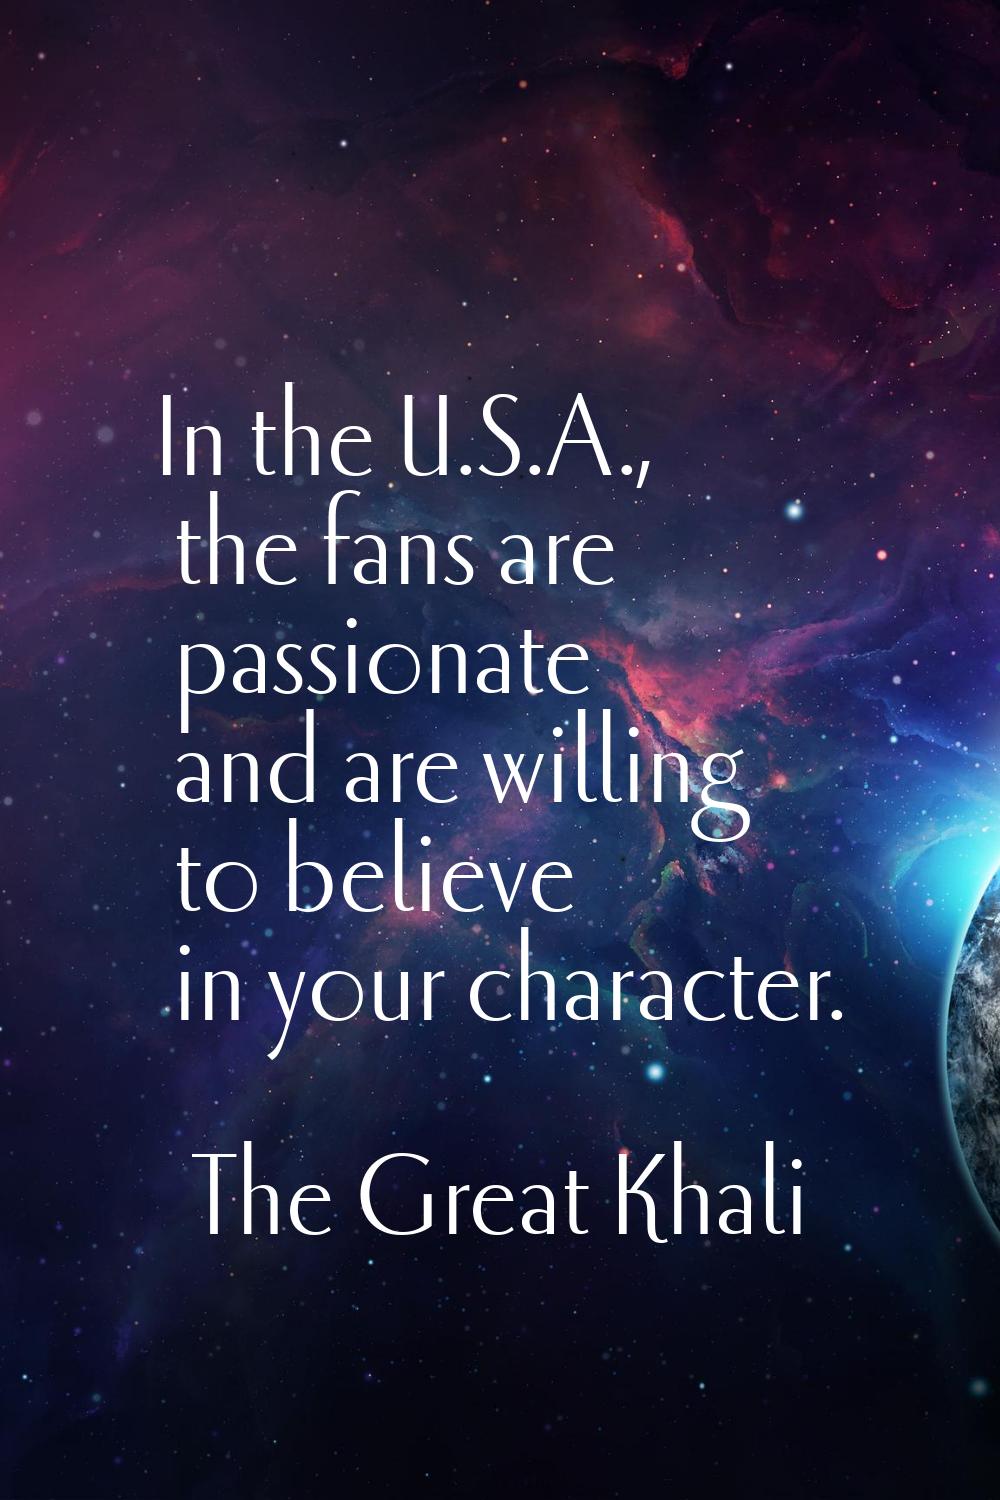 In the U.S.A., the fans are passionate and are willing to believe in your character.